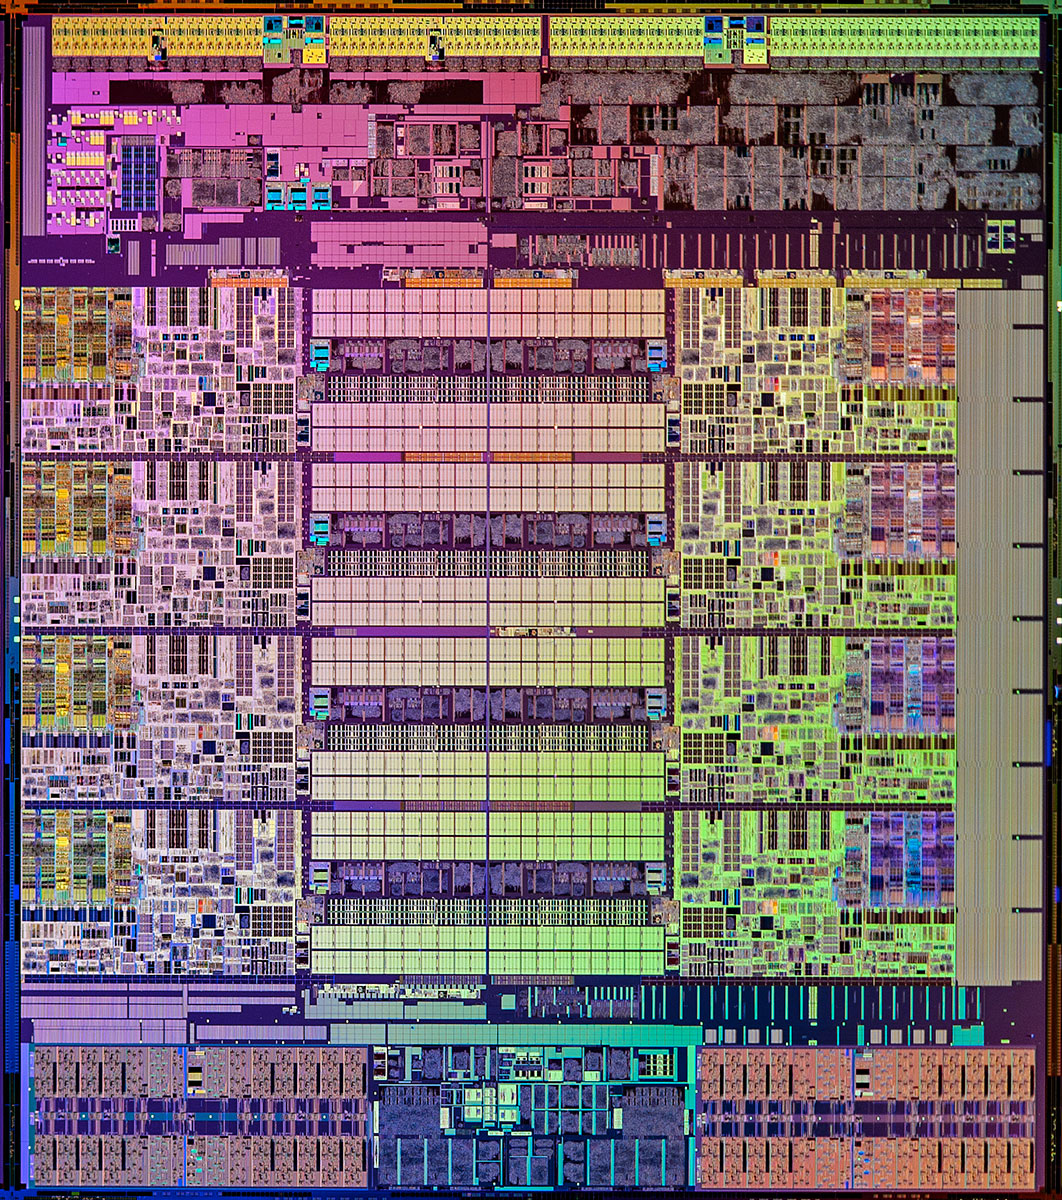 die Haswell-E